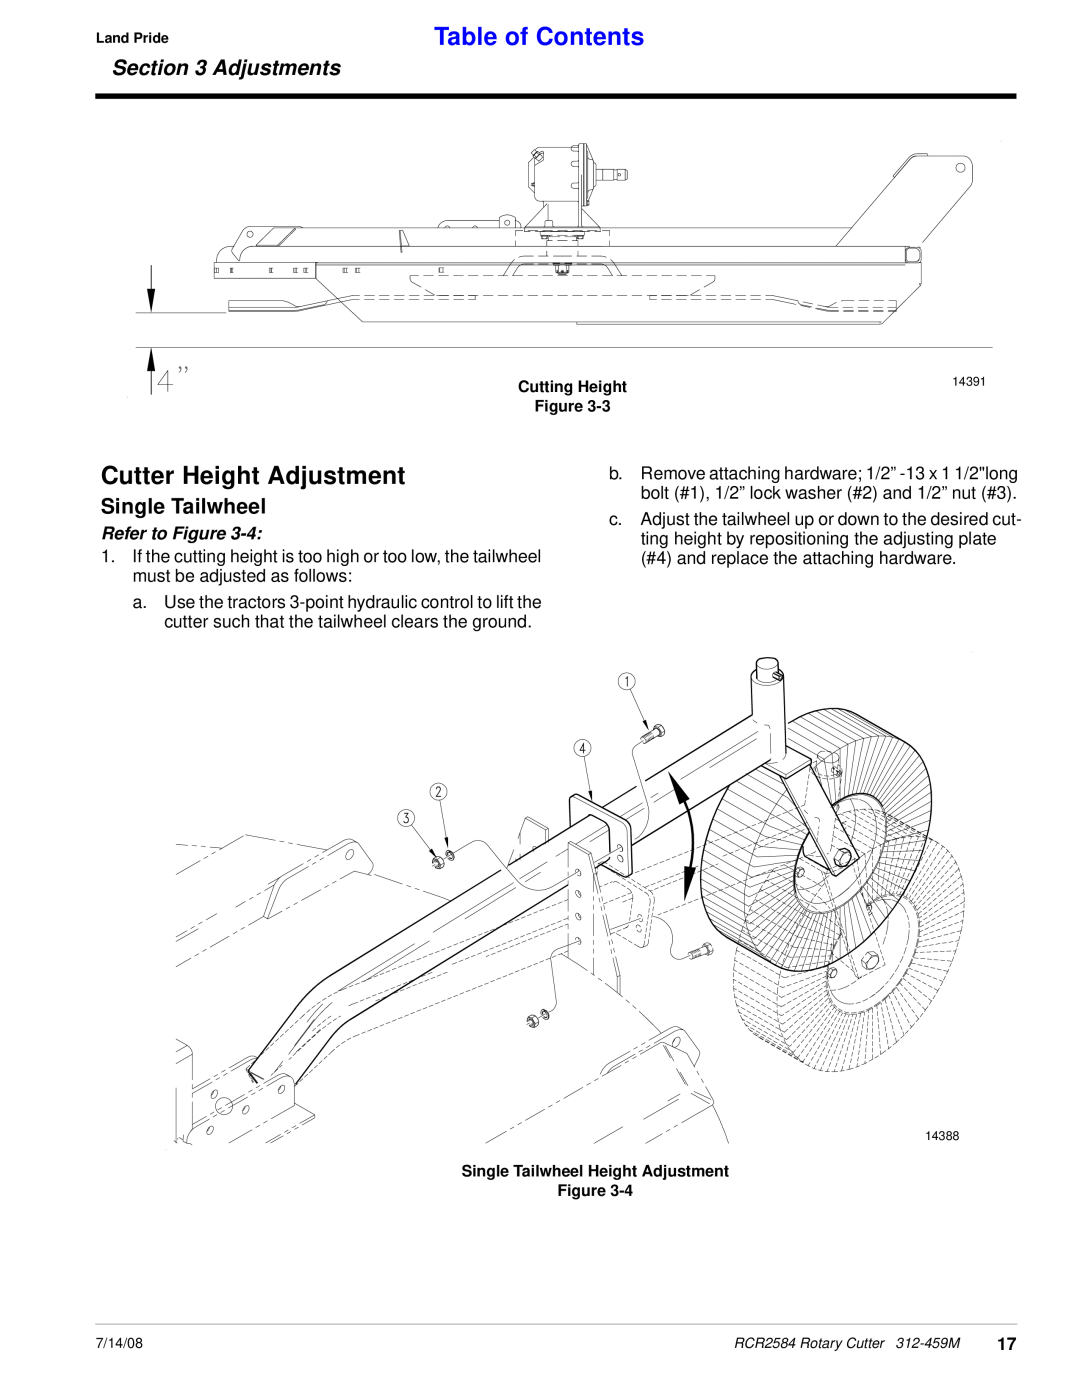 Land Pride RCR2584 manual Cutter Height Adjustment, Single Tailwheel, Table of Contents, Adjustments, Refer to Figure 